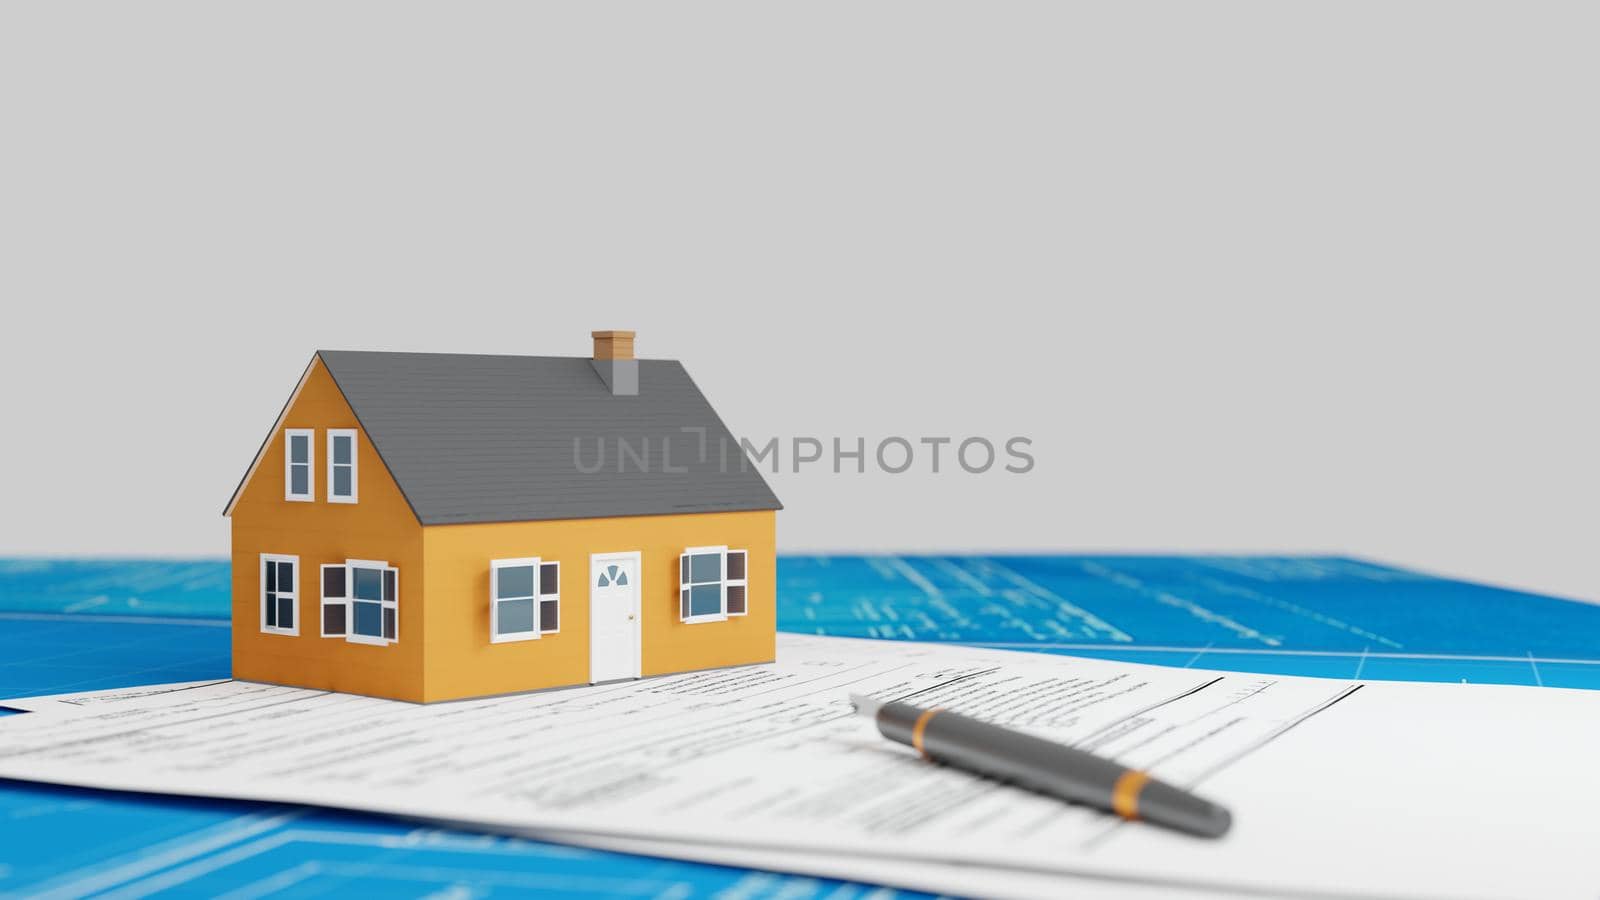 Real estate business, house building concept. Suburban house model with blueprints and legal papers. Digital render.